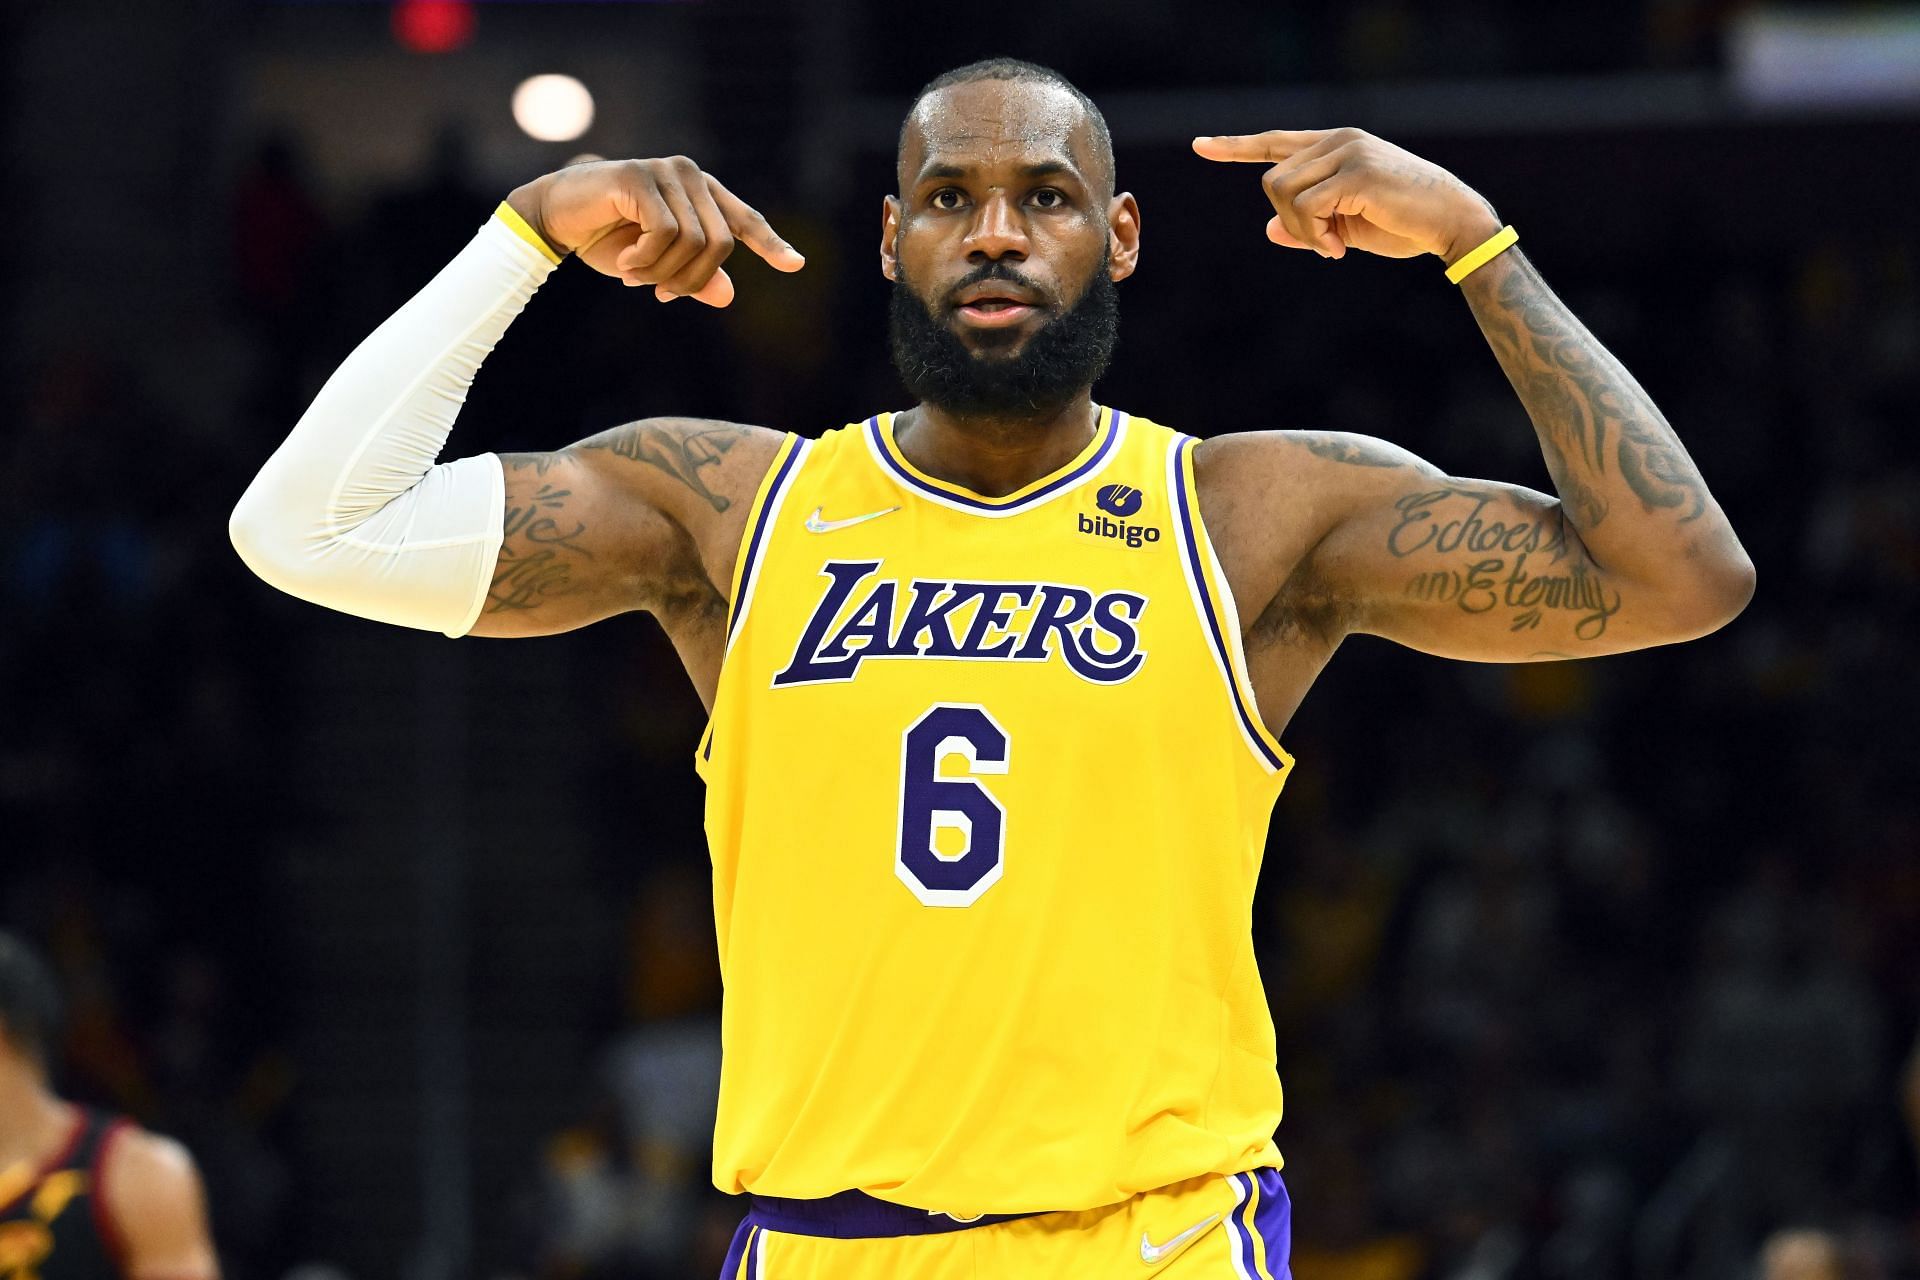 LeBron James #6 of the Los Angeles Lakers celebrates